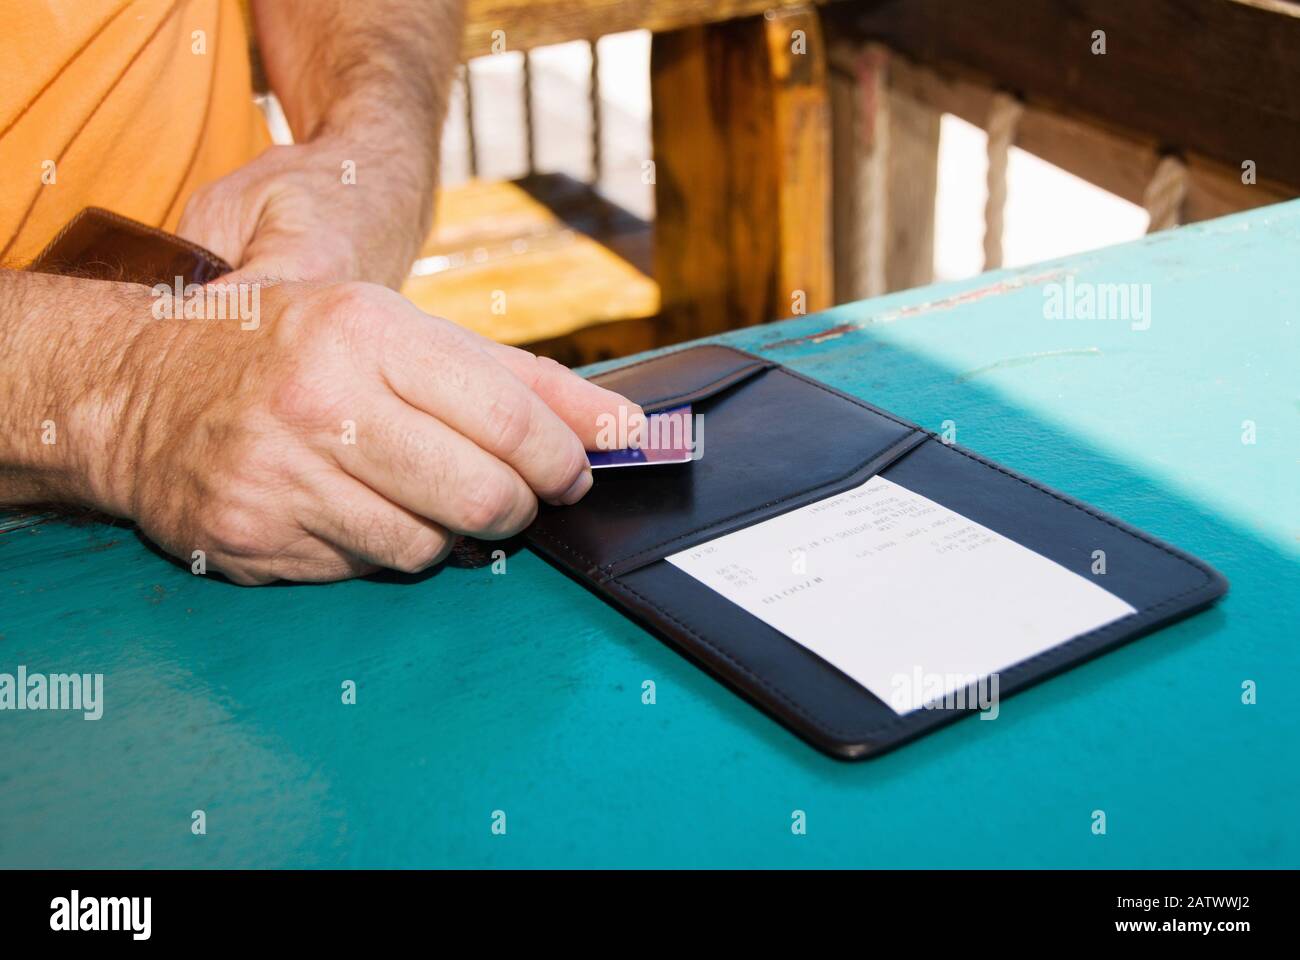 A man is paying the lunch bill with a charge card at a restaurant.  This was shot on a restaurant patio outdoors. Selective focus. Stock Photo